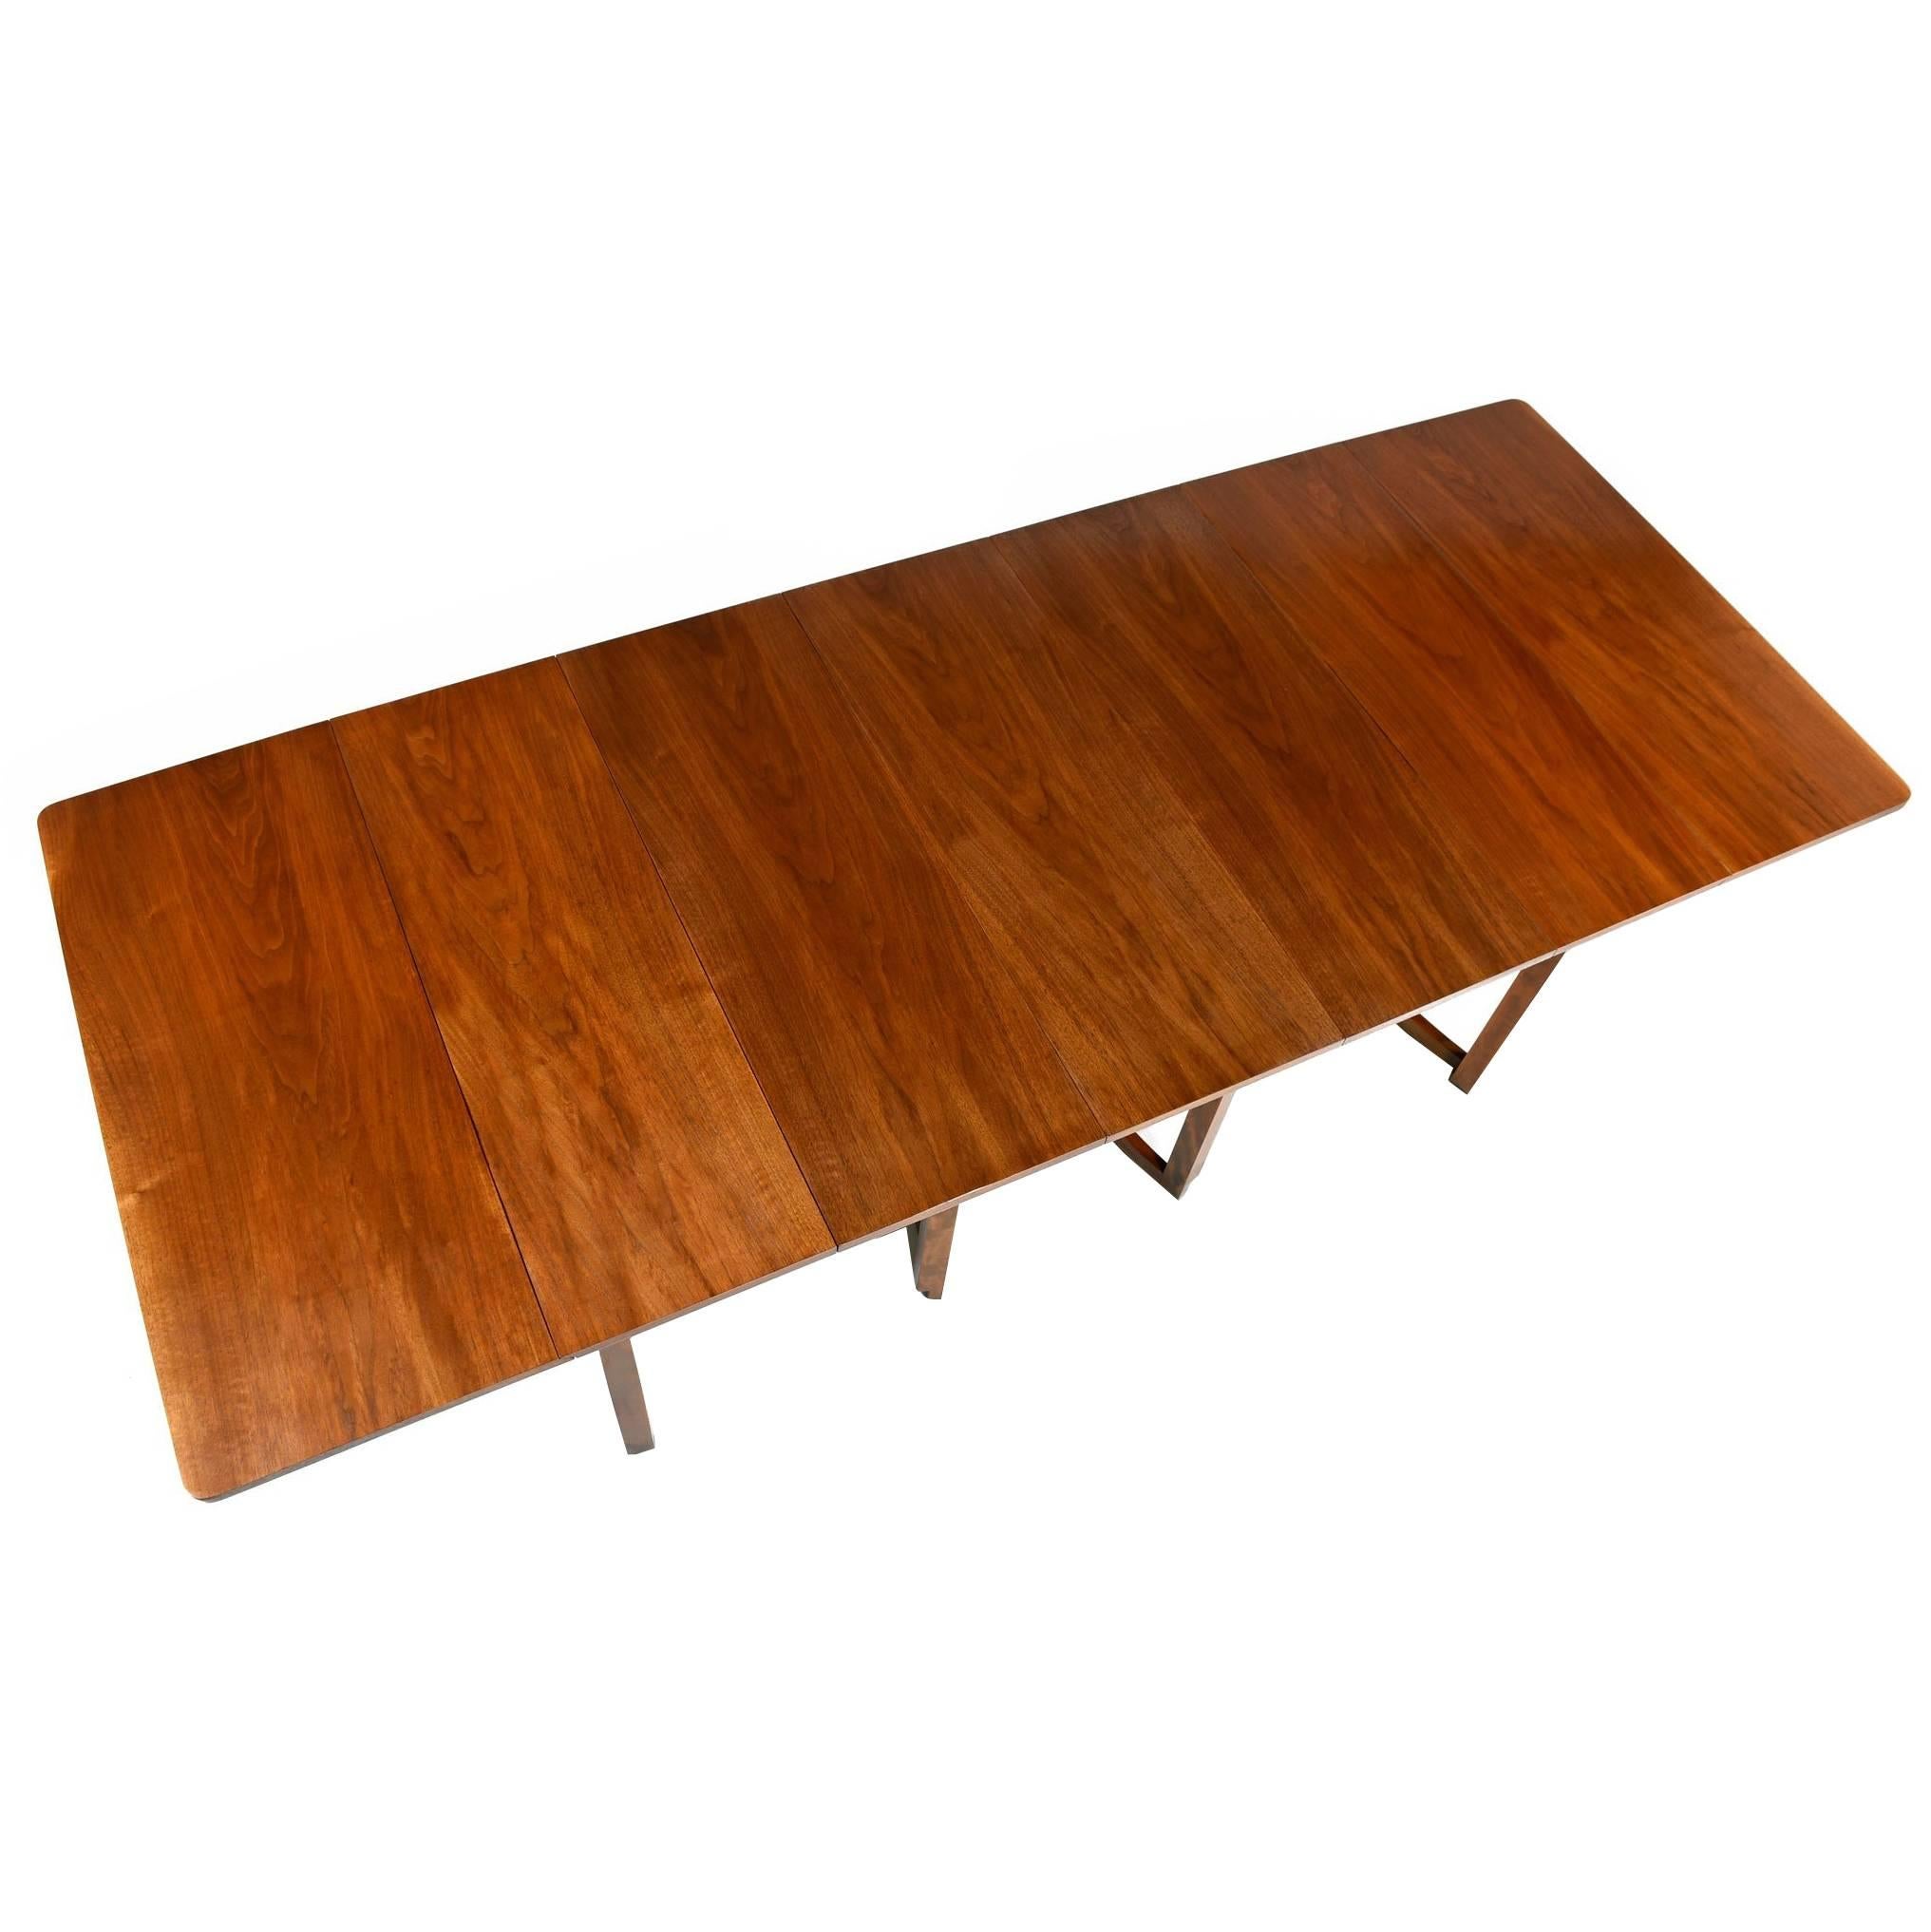 Exquisite Mid-Century Modern table designed by T.H. Robsjohn-Gibbings for Widdicomb. The table bears the original maker's label and designer's name on the underside. Our team of in-house professionals have restored this table back to its original